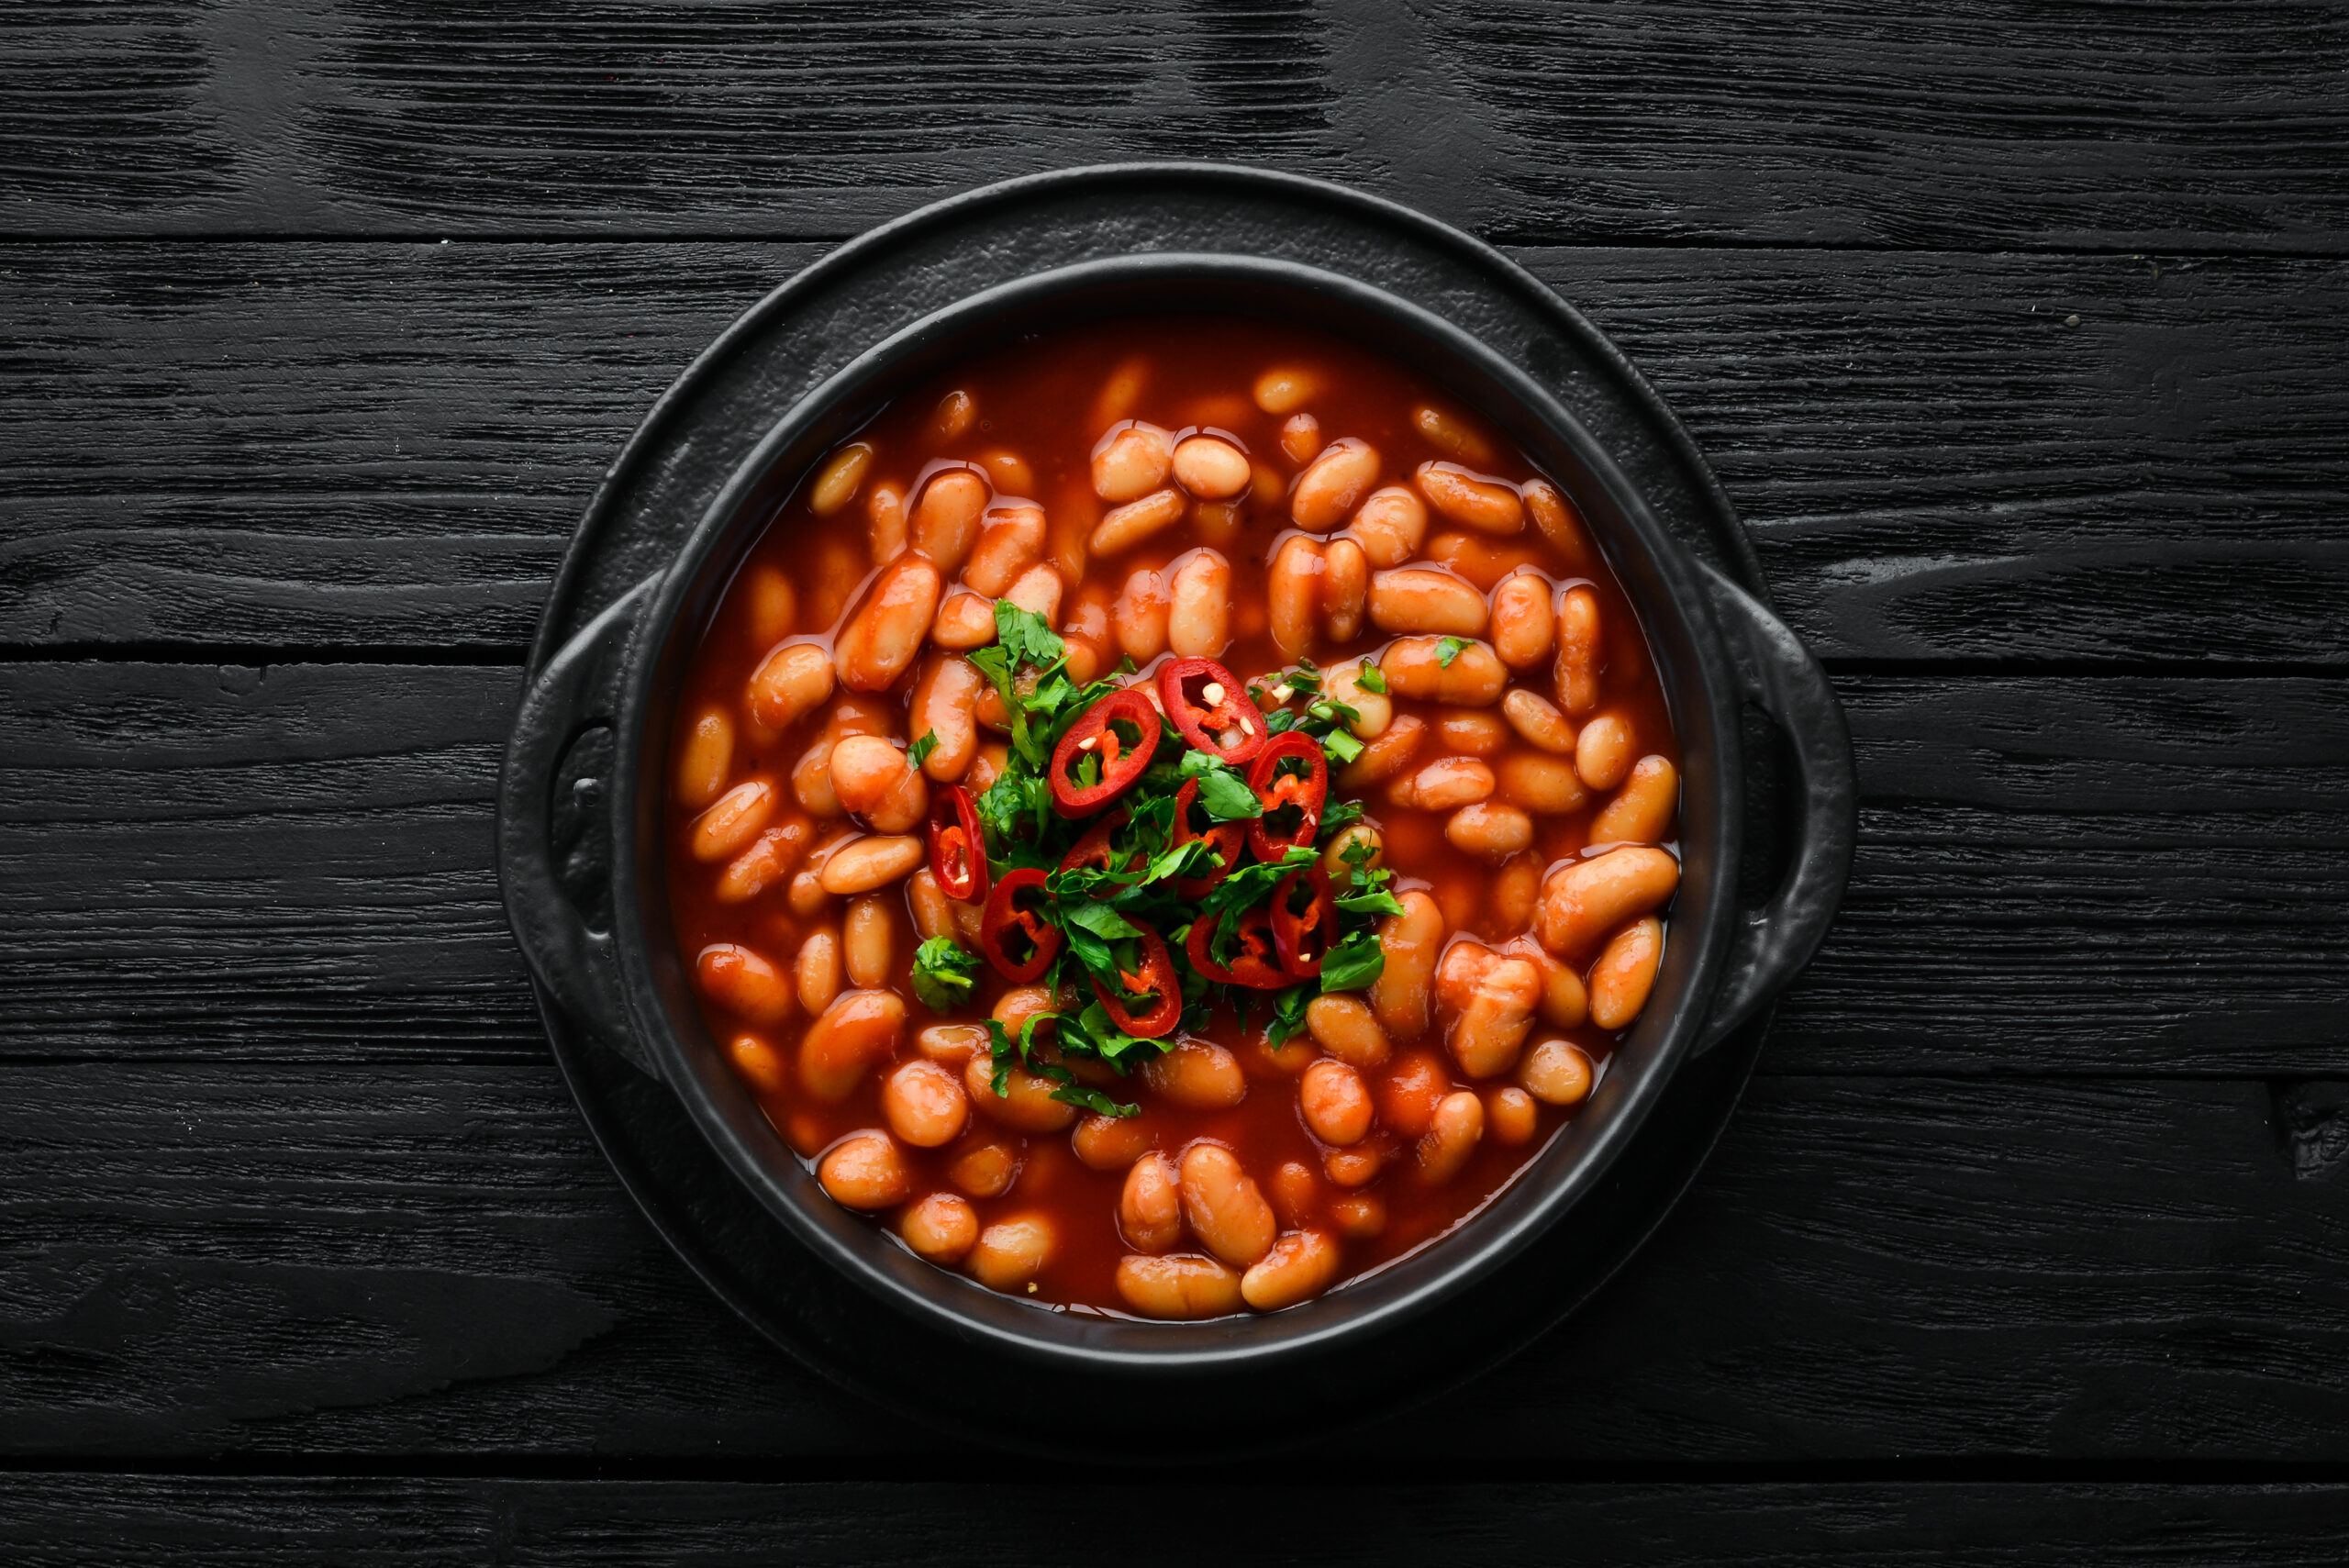 Vegetarian menu. Stewed beans in tomato sauce with parsley and chili. In a black bowl. Top view. Free space for your text.